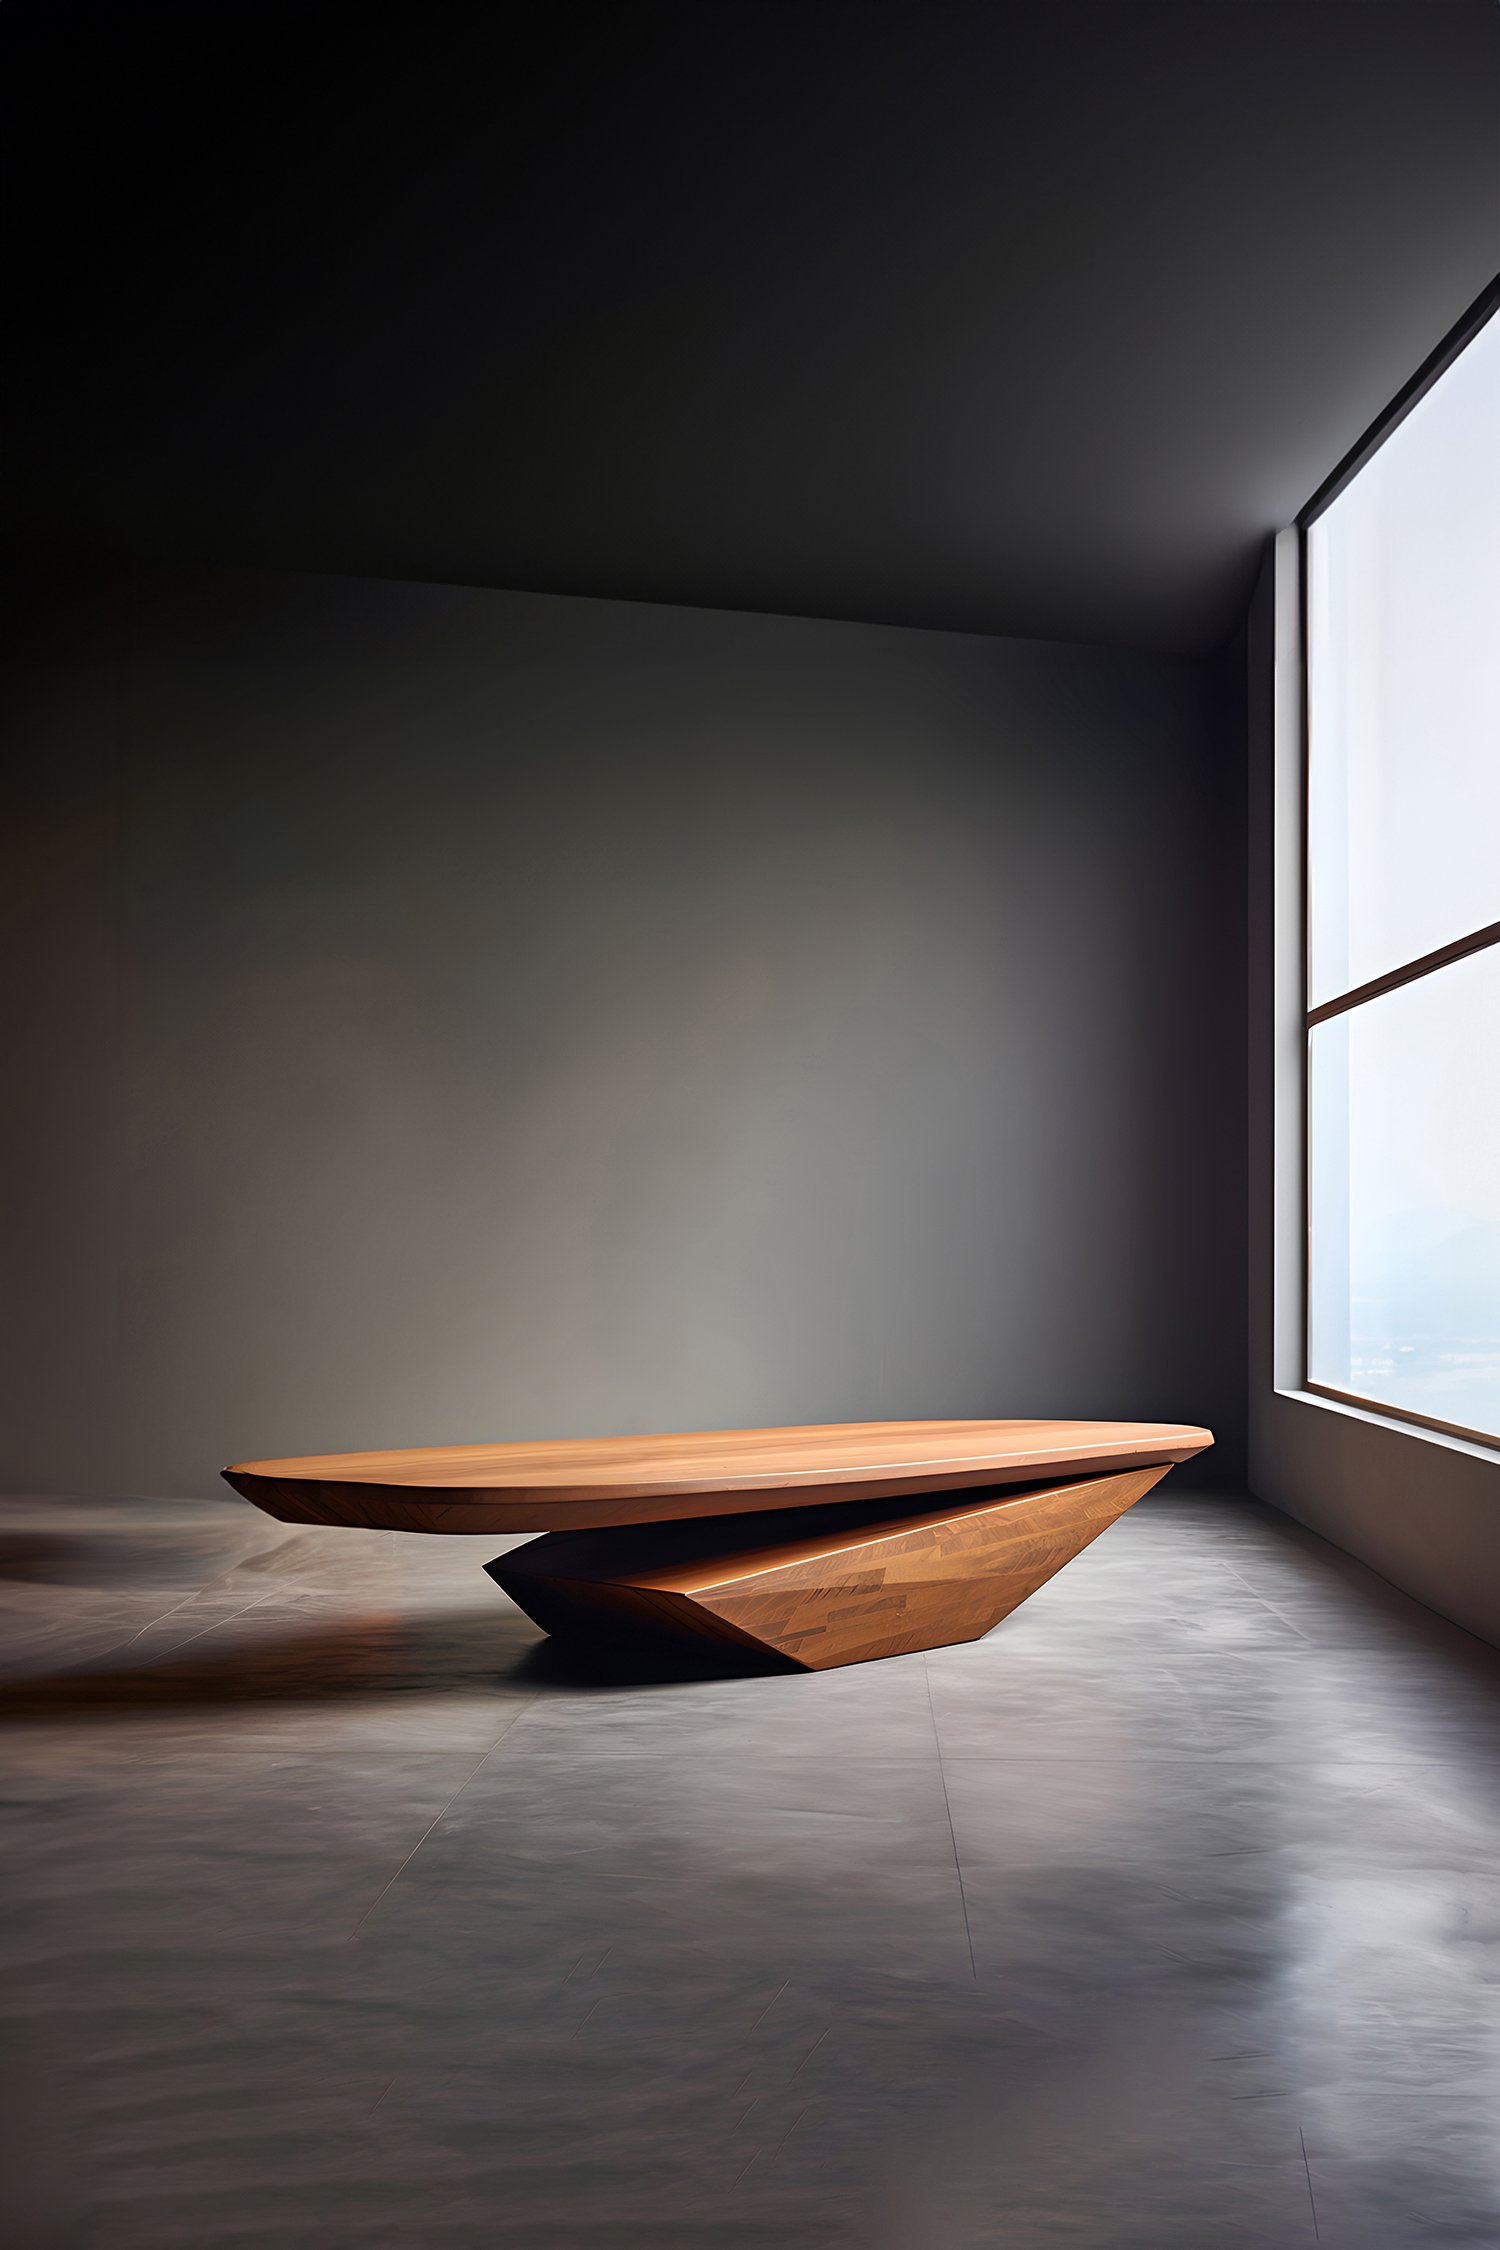 Oval Coffee Table Made of Solid Wood, Center Table Solace S18 by Joel Escalona — 7.jpg